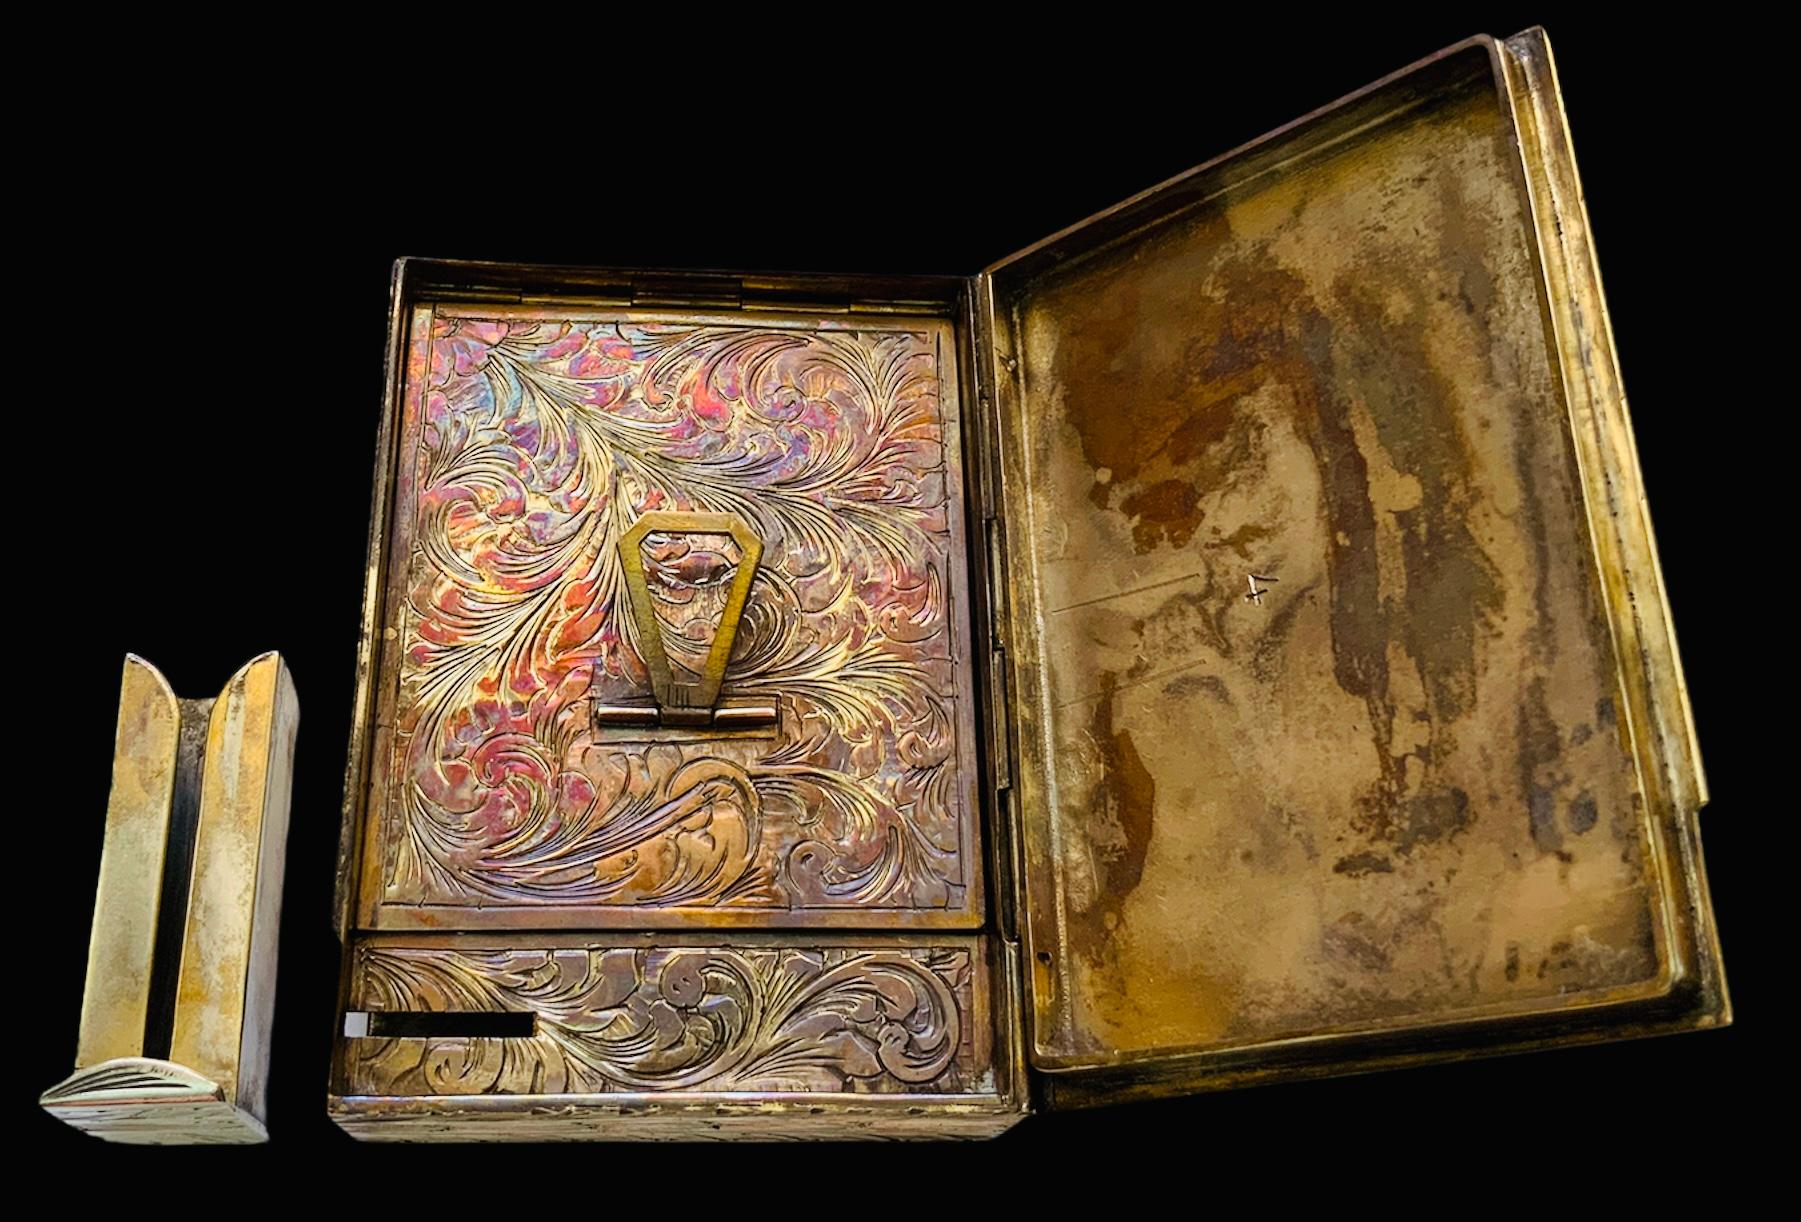 This is an Italian metal vermeil square compact with a hand painted pastoral scene of a romantic couple. It depicts a sheperdess resting in the lap of a shepherd in a garden with a fountain behind them. There are also some sheeps laying down in the